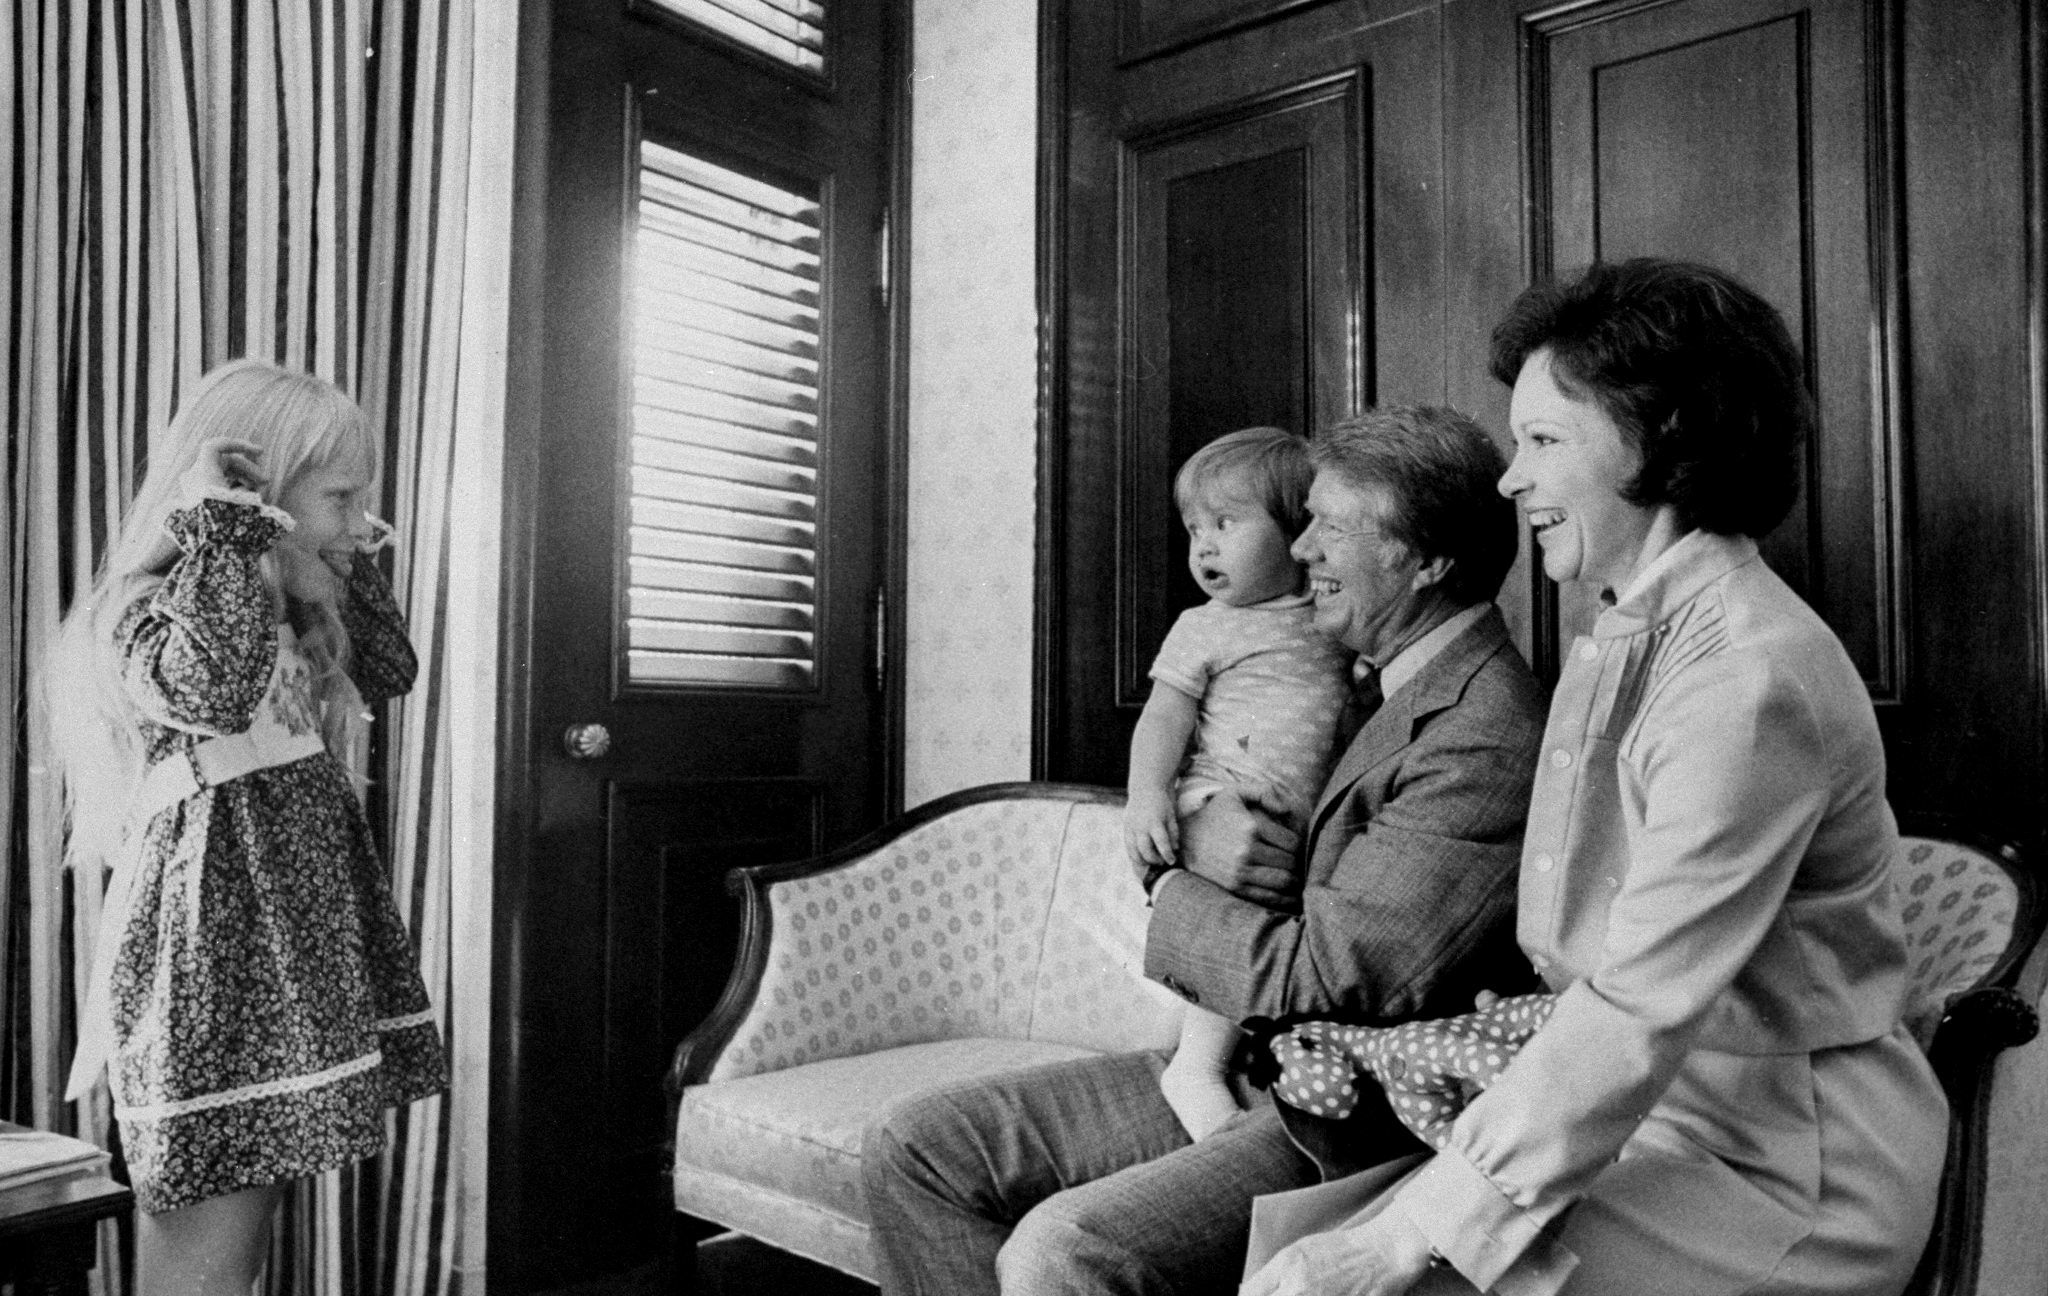 Rosalynn Carter, former first lady and wife of Jimmy Carter, passes away at 96